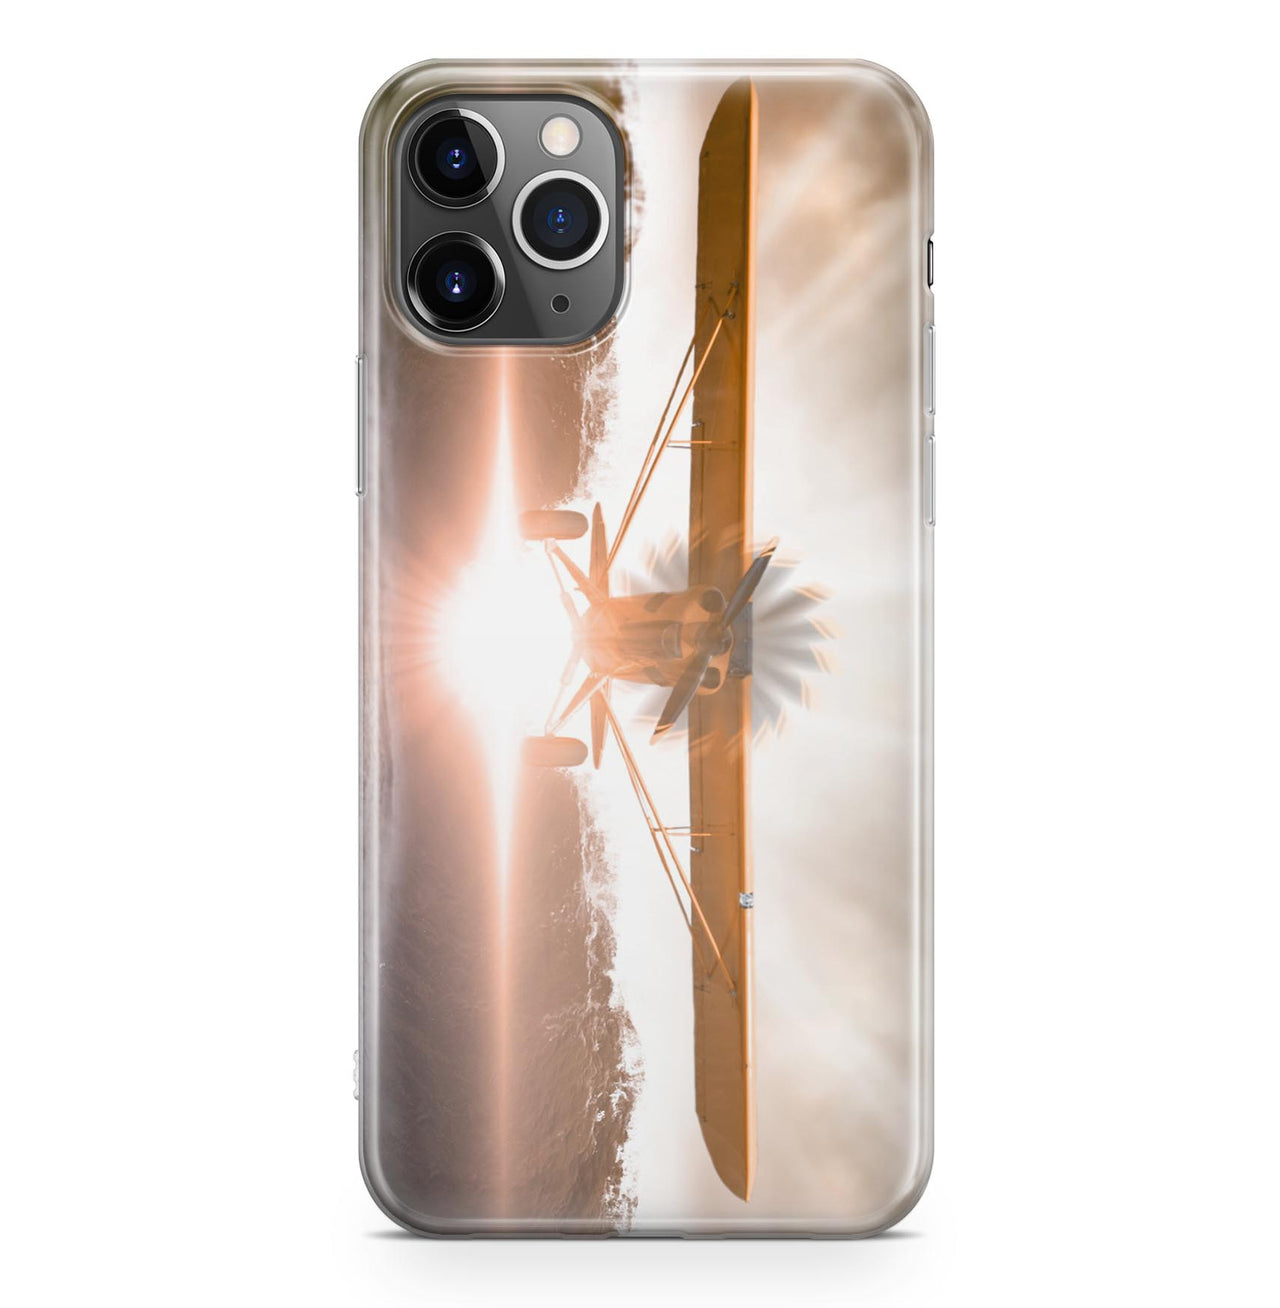 Graphical Propeller Designed iPhone Cases